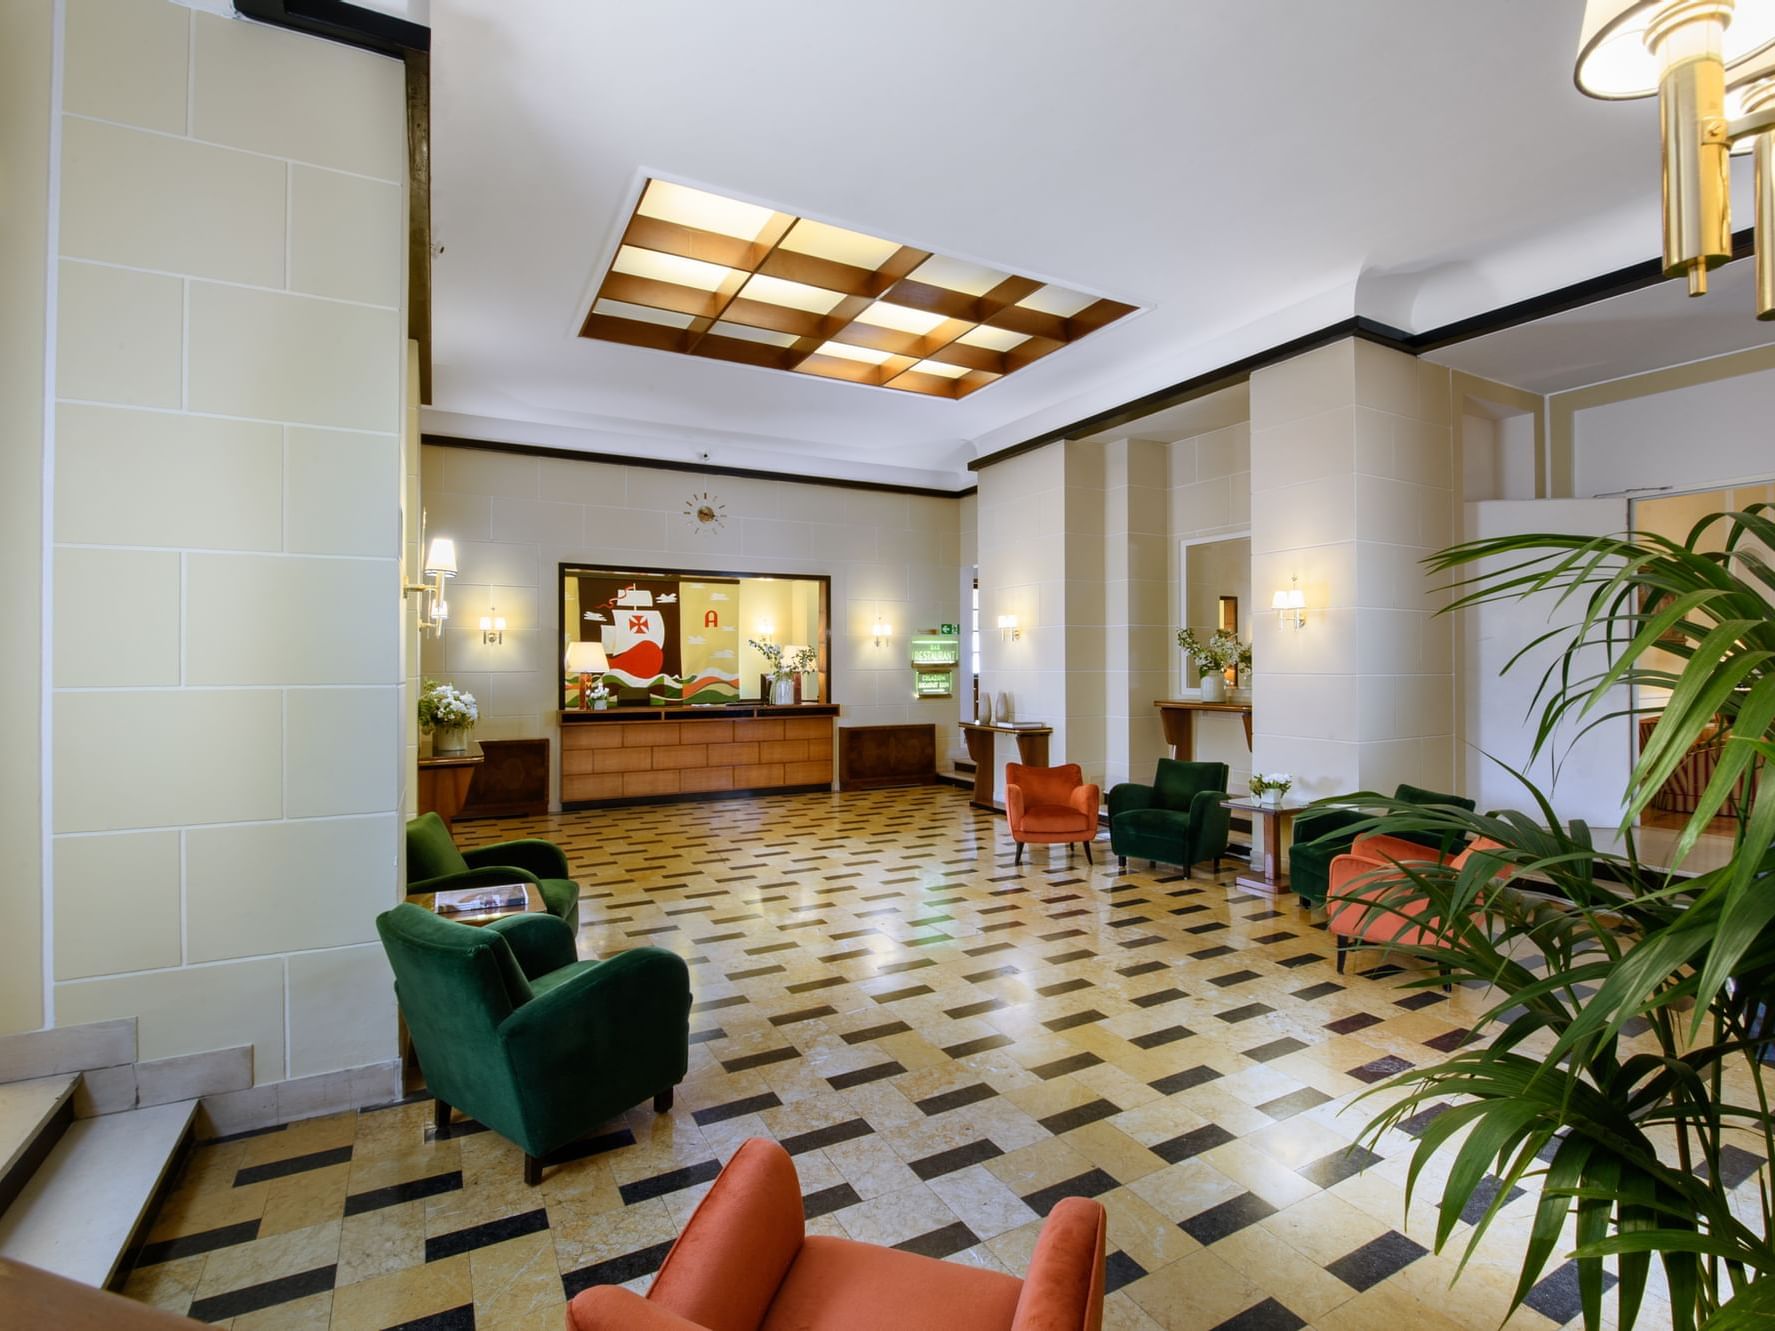 Hotel lobby with elegant decor and comfortable seating area at Bettoja Hotel Atlantico